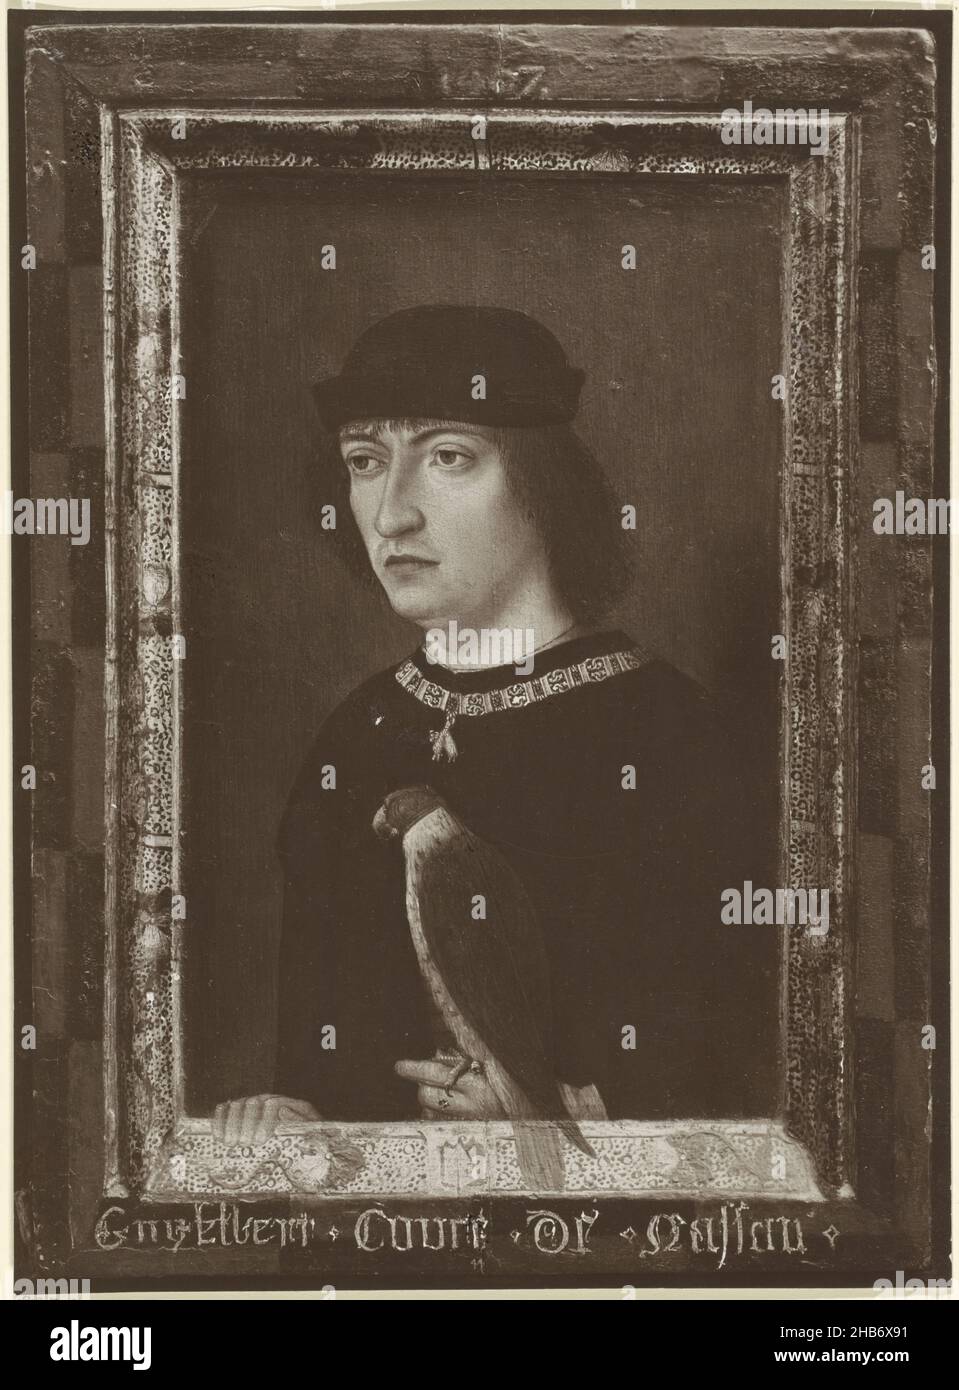 Portrait of Engelbrecht II, Count of Nassau-Dillenburg-Breda, Portrait of Engelbrecht II. In his left hand a falcon. In the lower margin his name and title., anonymous, after: Master of the Portraits of Princes, Netherlands, 1850 - 1930, photographic support, height 347 mm × width 255 mm Stock Photo